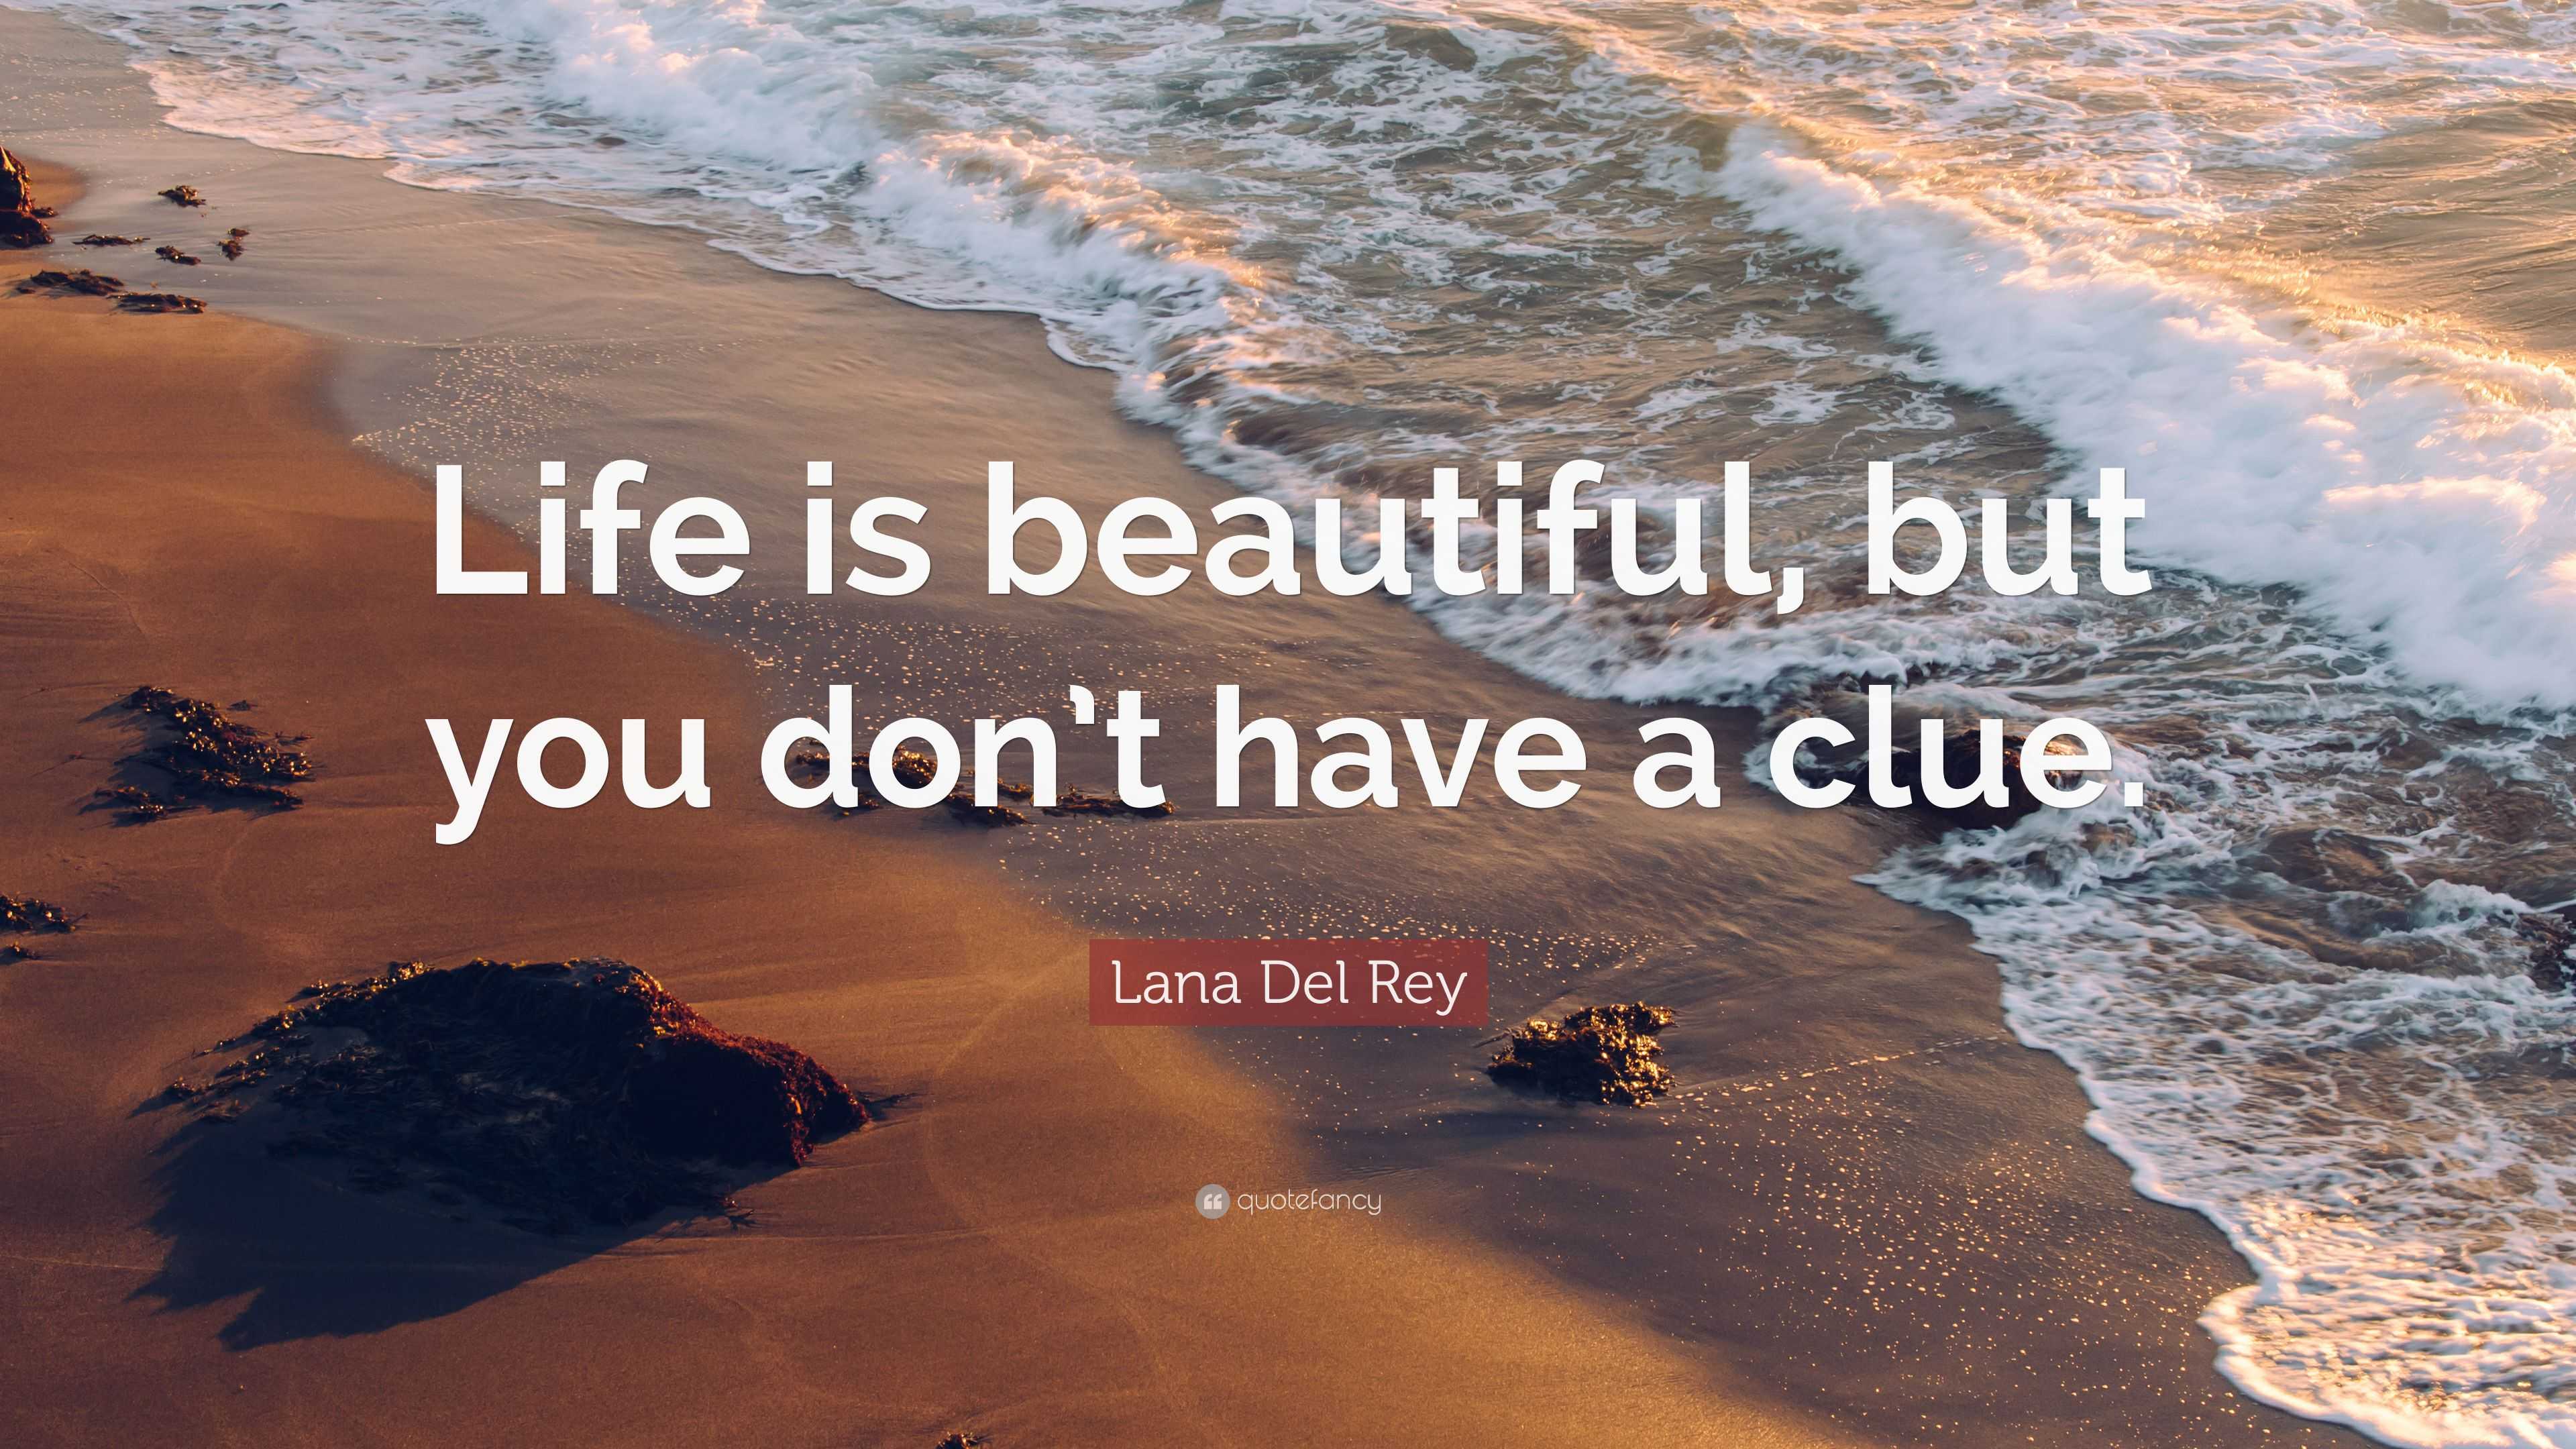 Lana Del Rey Quote: “Life is beautiful, but you don’t have a clue.”